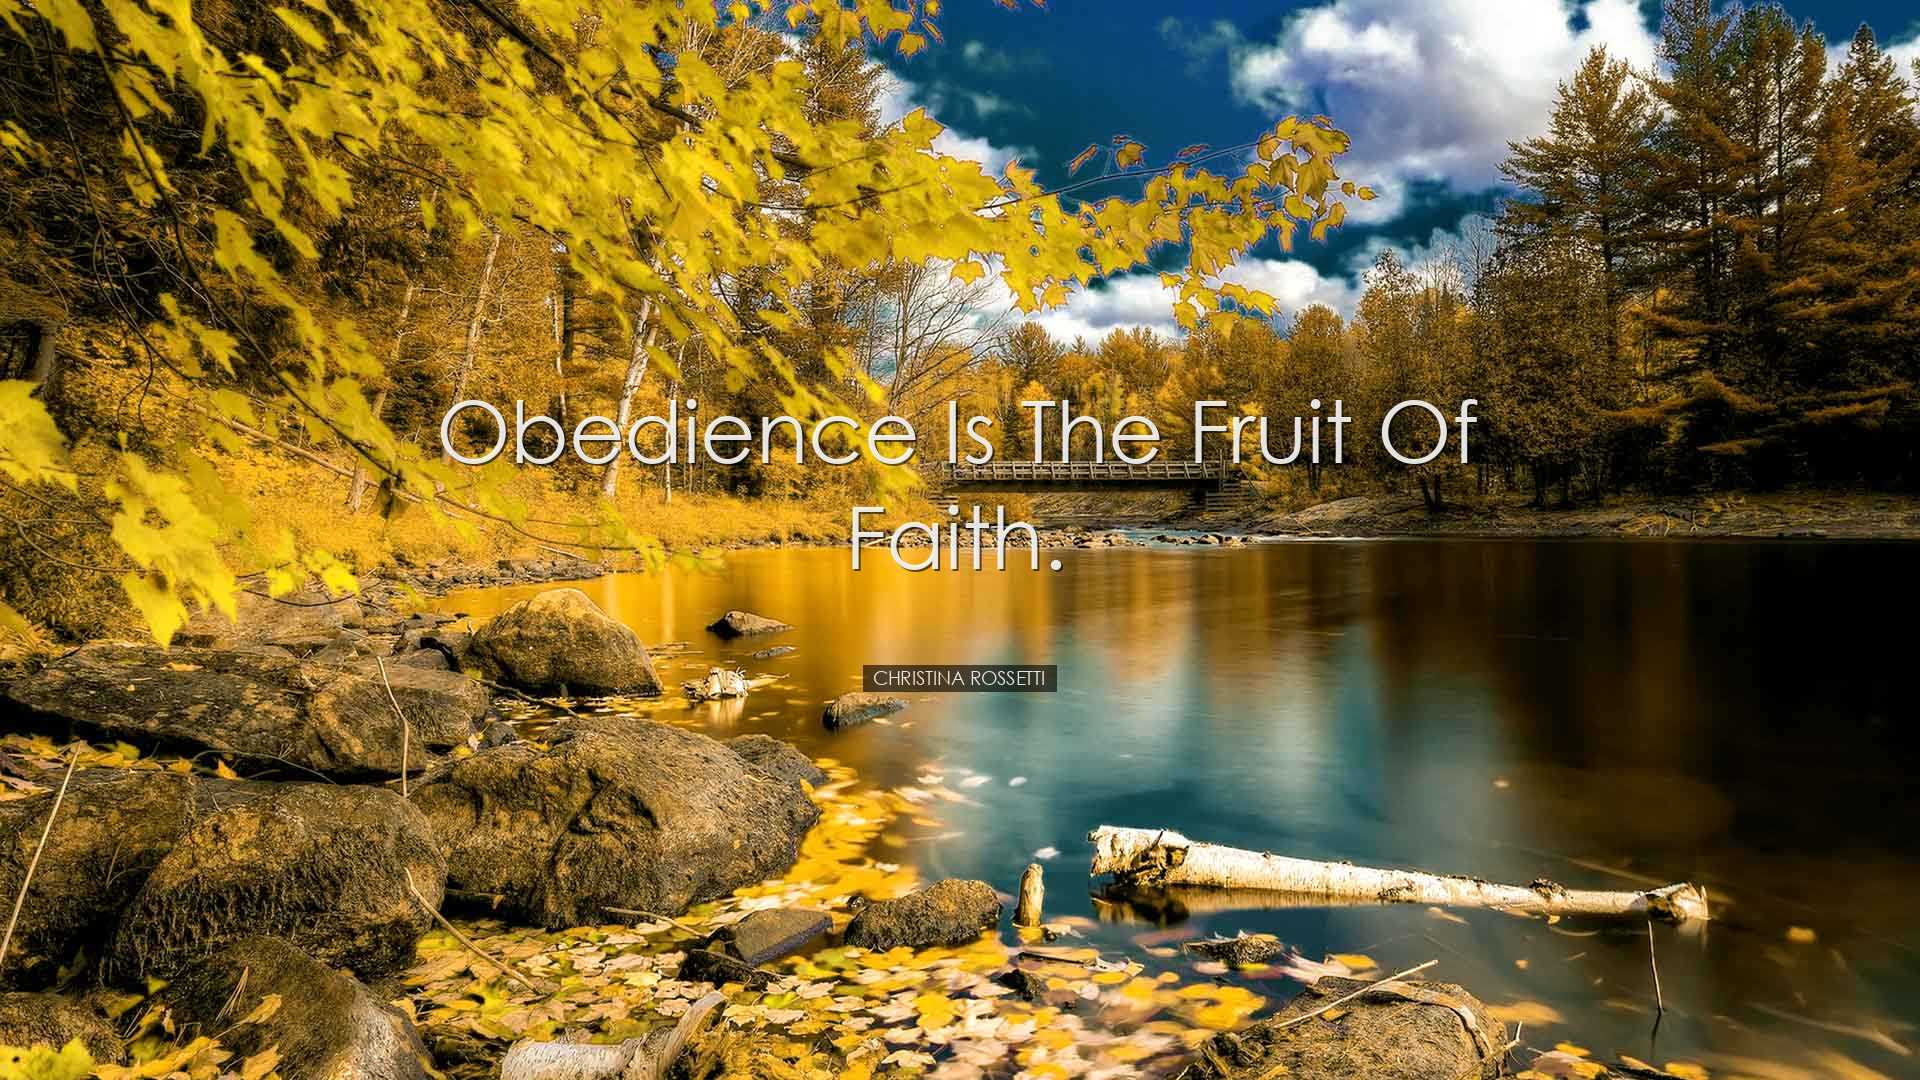 Obedience is the fruit of faith. - Christina Rossetti